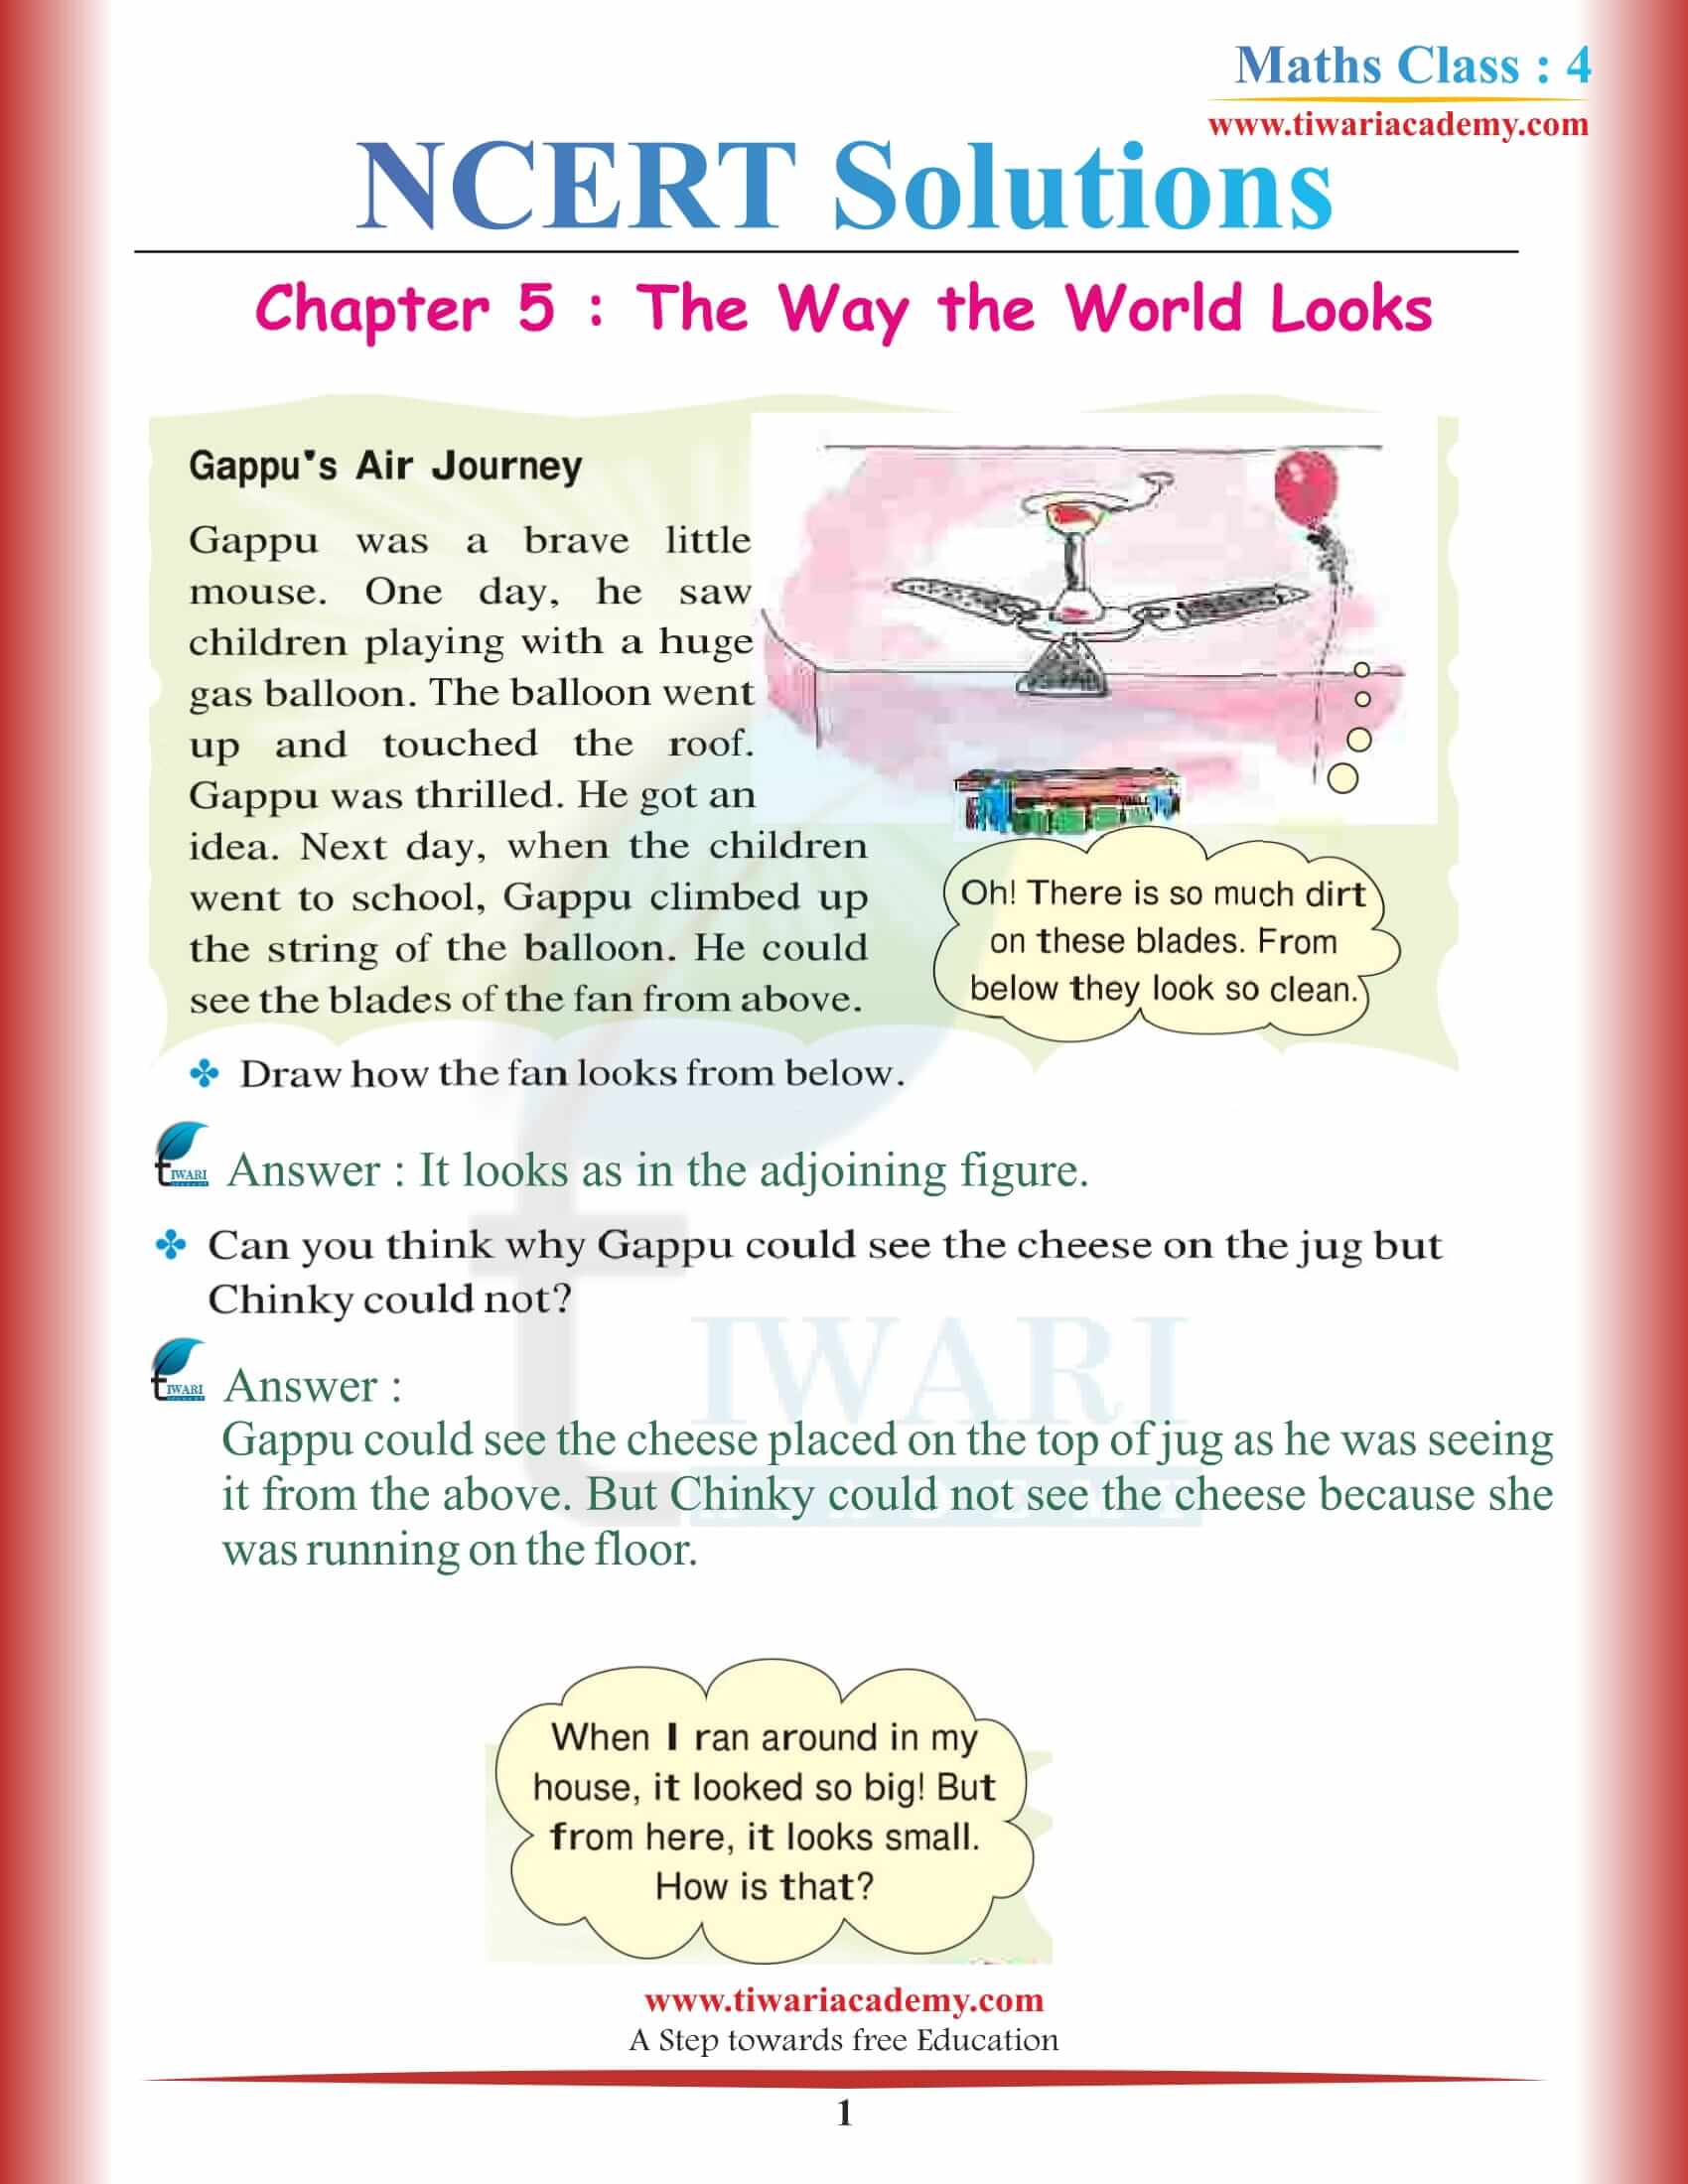 NCERT Solutions for Class 4 Maths Chapter 5 The Way The World Looks